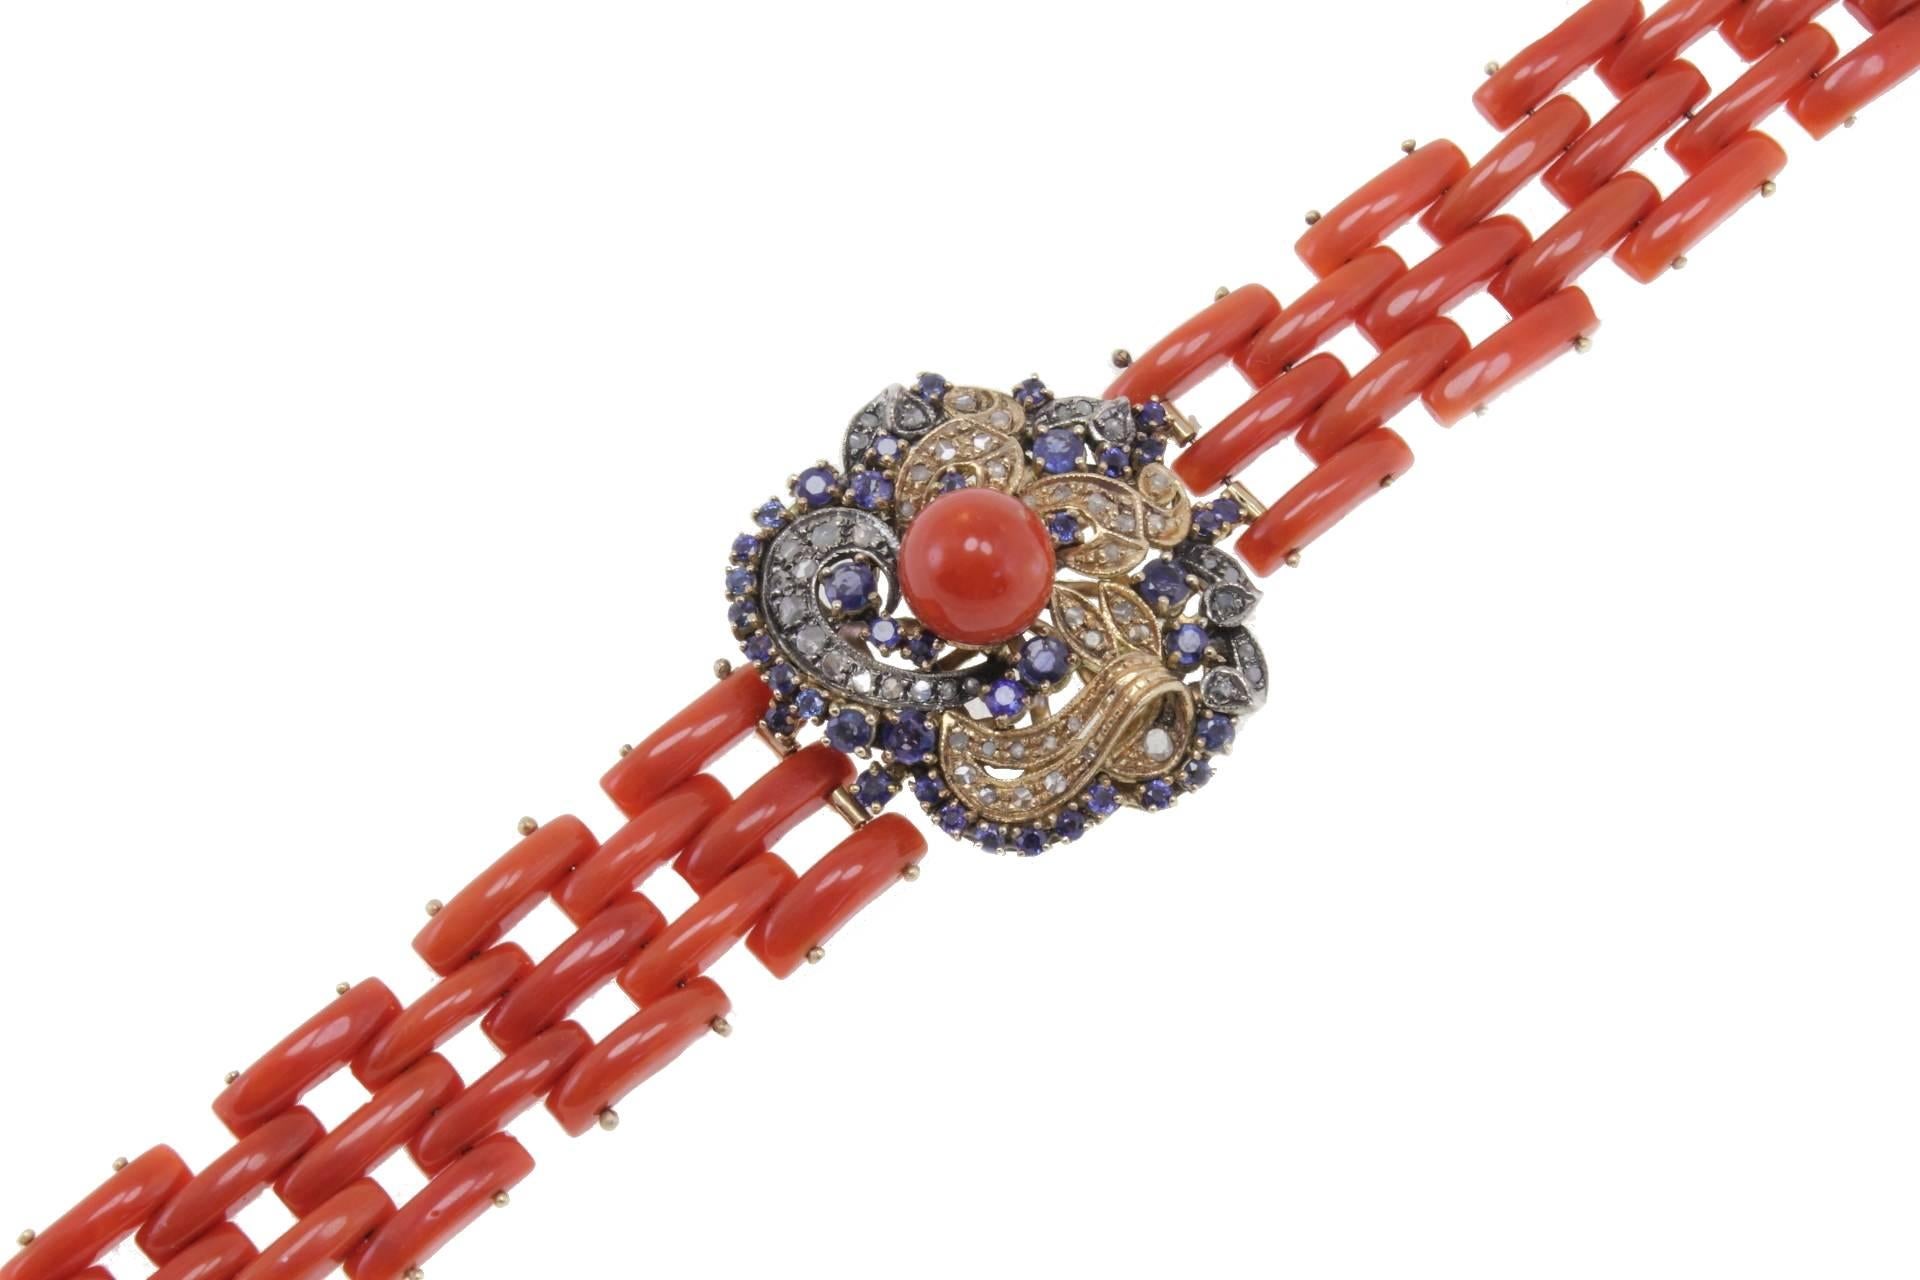 14kt yellow gold and silver coral bracelet mounted with a flower in center composed of diamonds blue sapphires and coral pearls.
Diamonds 0.57 kt
Blue Sapphires 3.82 kt
Coral 13.20 gr
Tot.Weight 41.40 gr
R.F ogfg